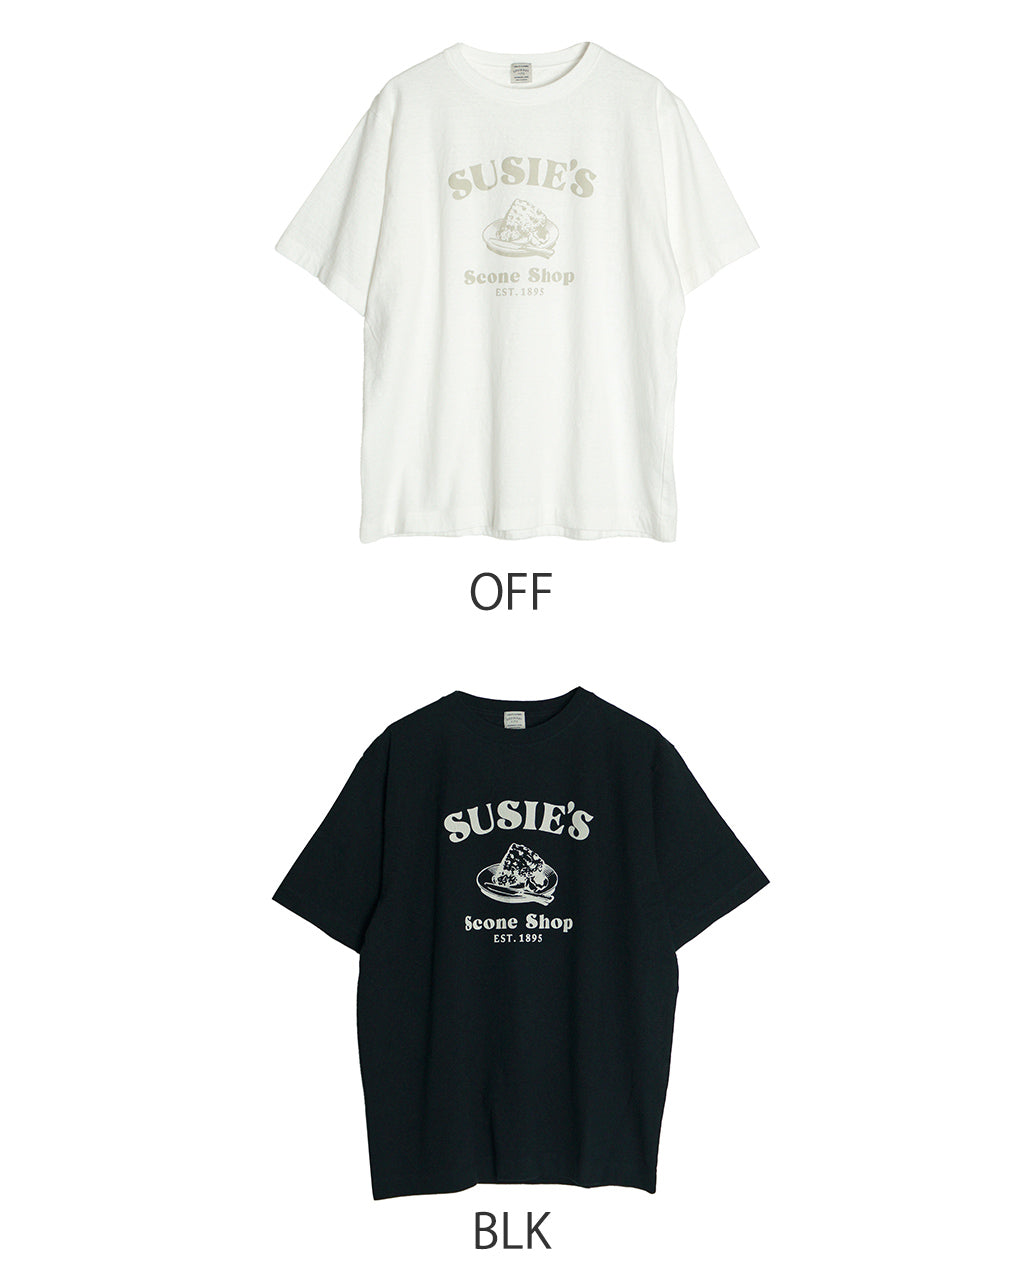 ORDINARY FITS オーディナリーフィッツ プリント Tシャツ スージー PRINT TEE SUSIE   OF-C101